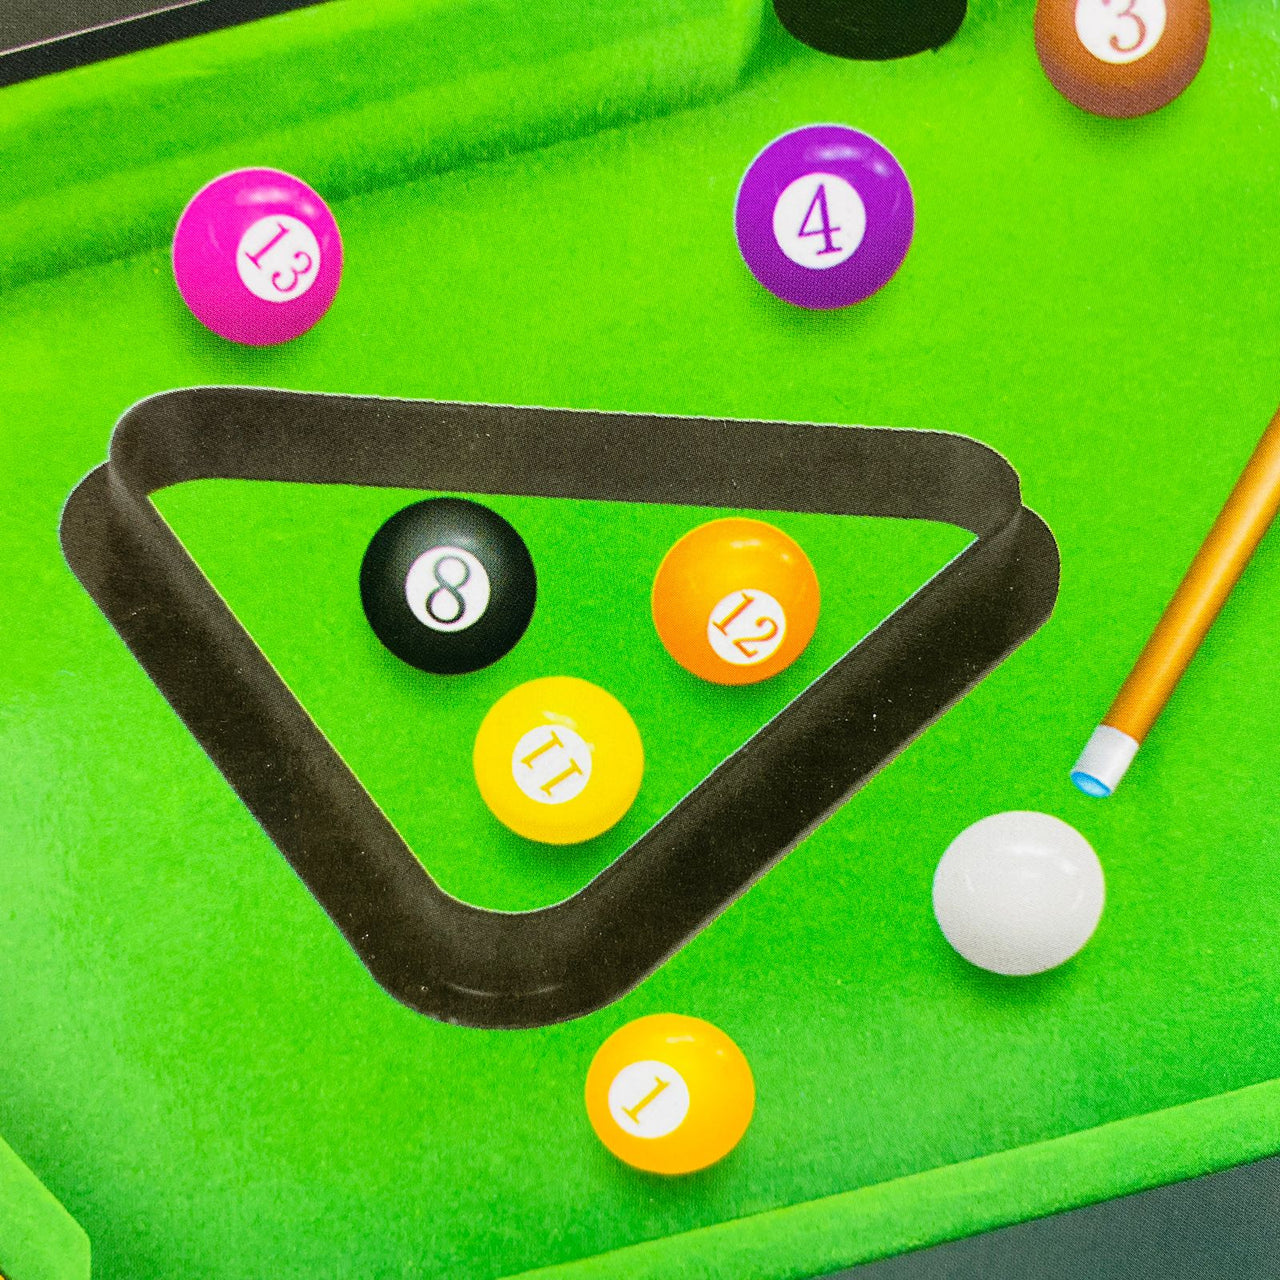 table billiards snooker game